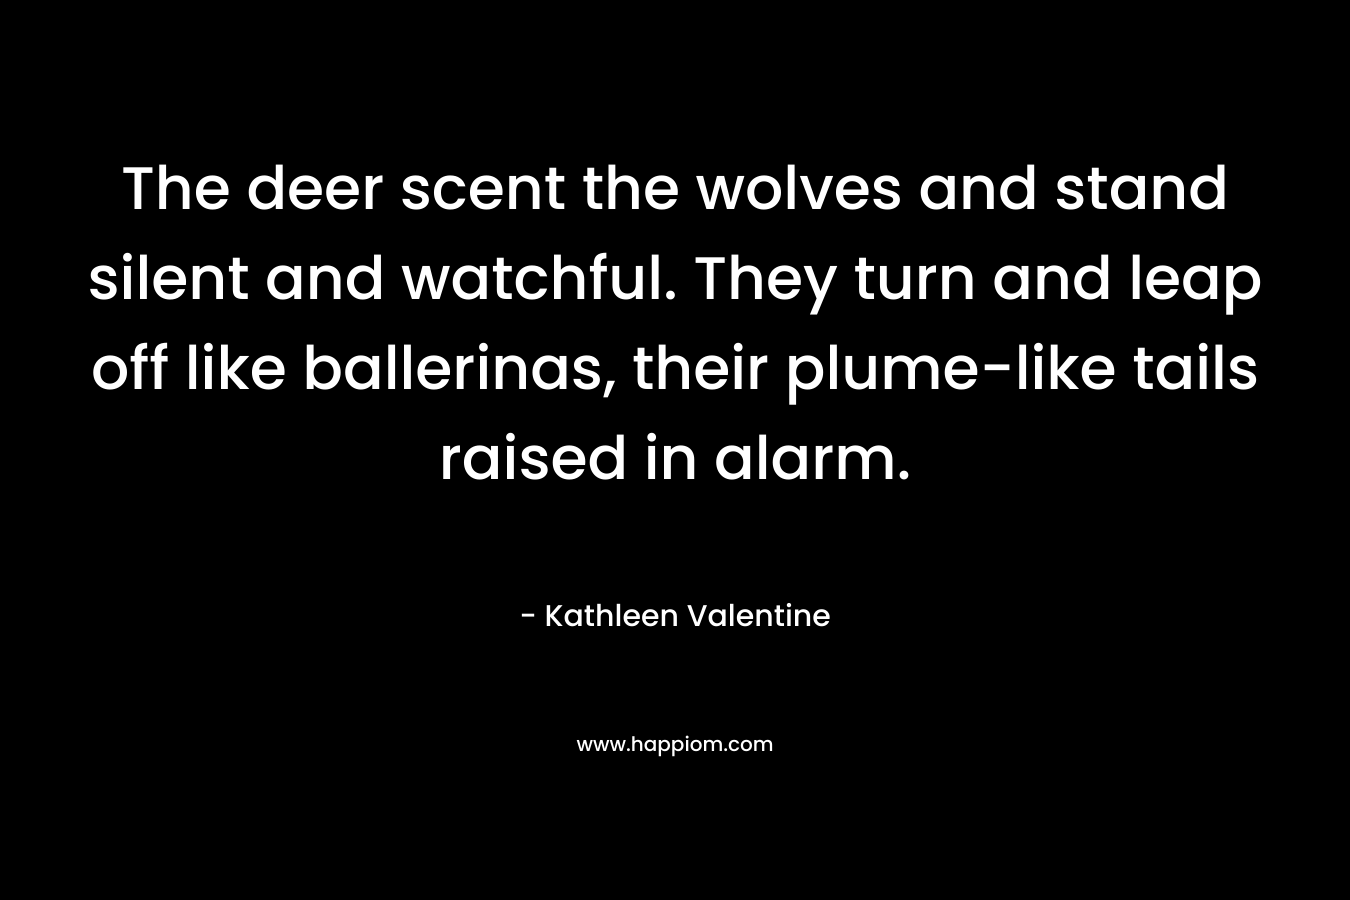 The deer scent the wolves and stand silent and watchful. They turn and leap off like ballerinas, their plume-like tails raised in alarm. – Kathleen Valentine